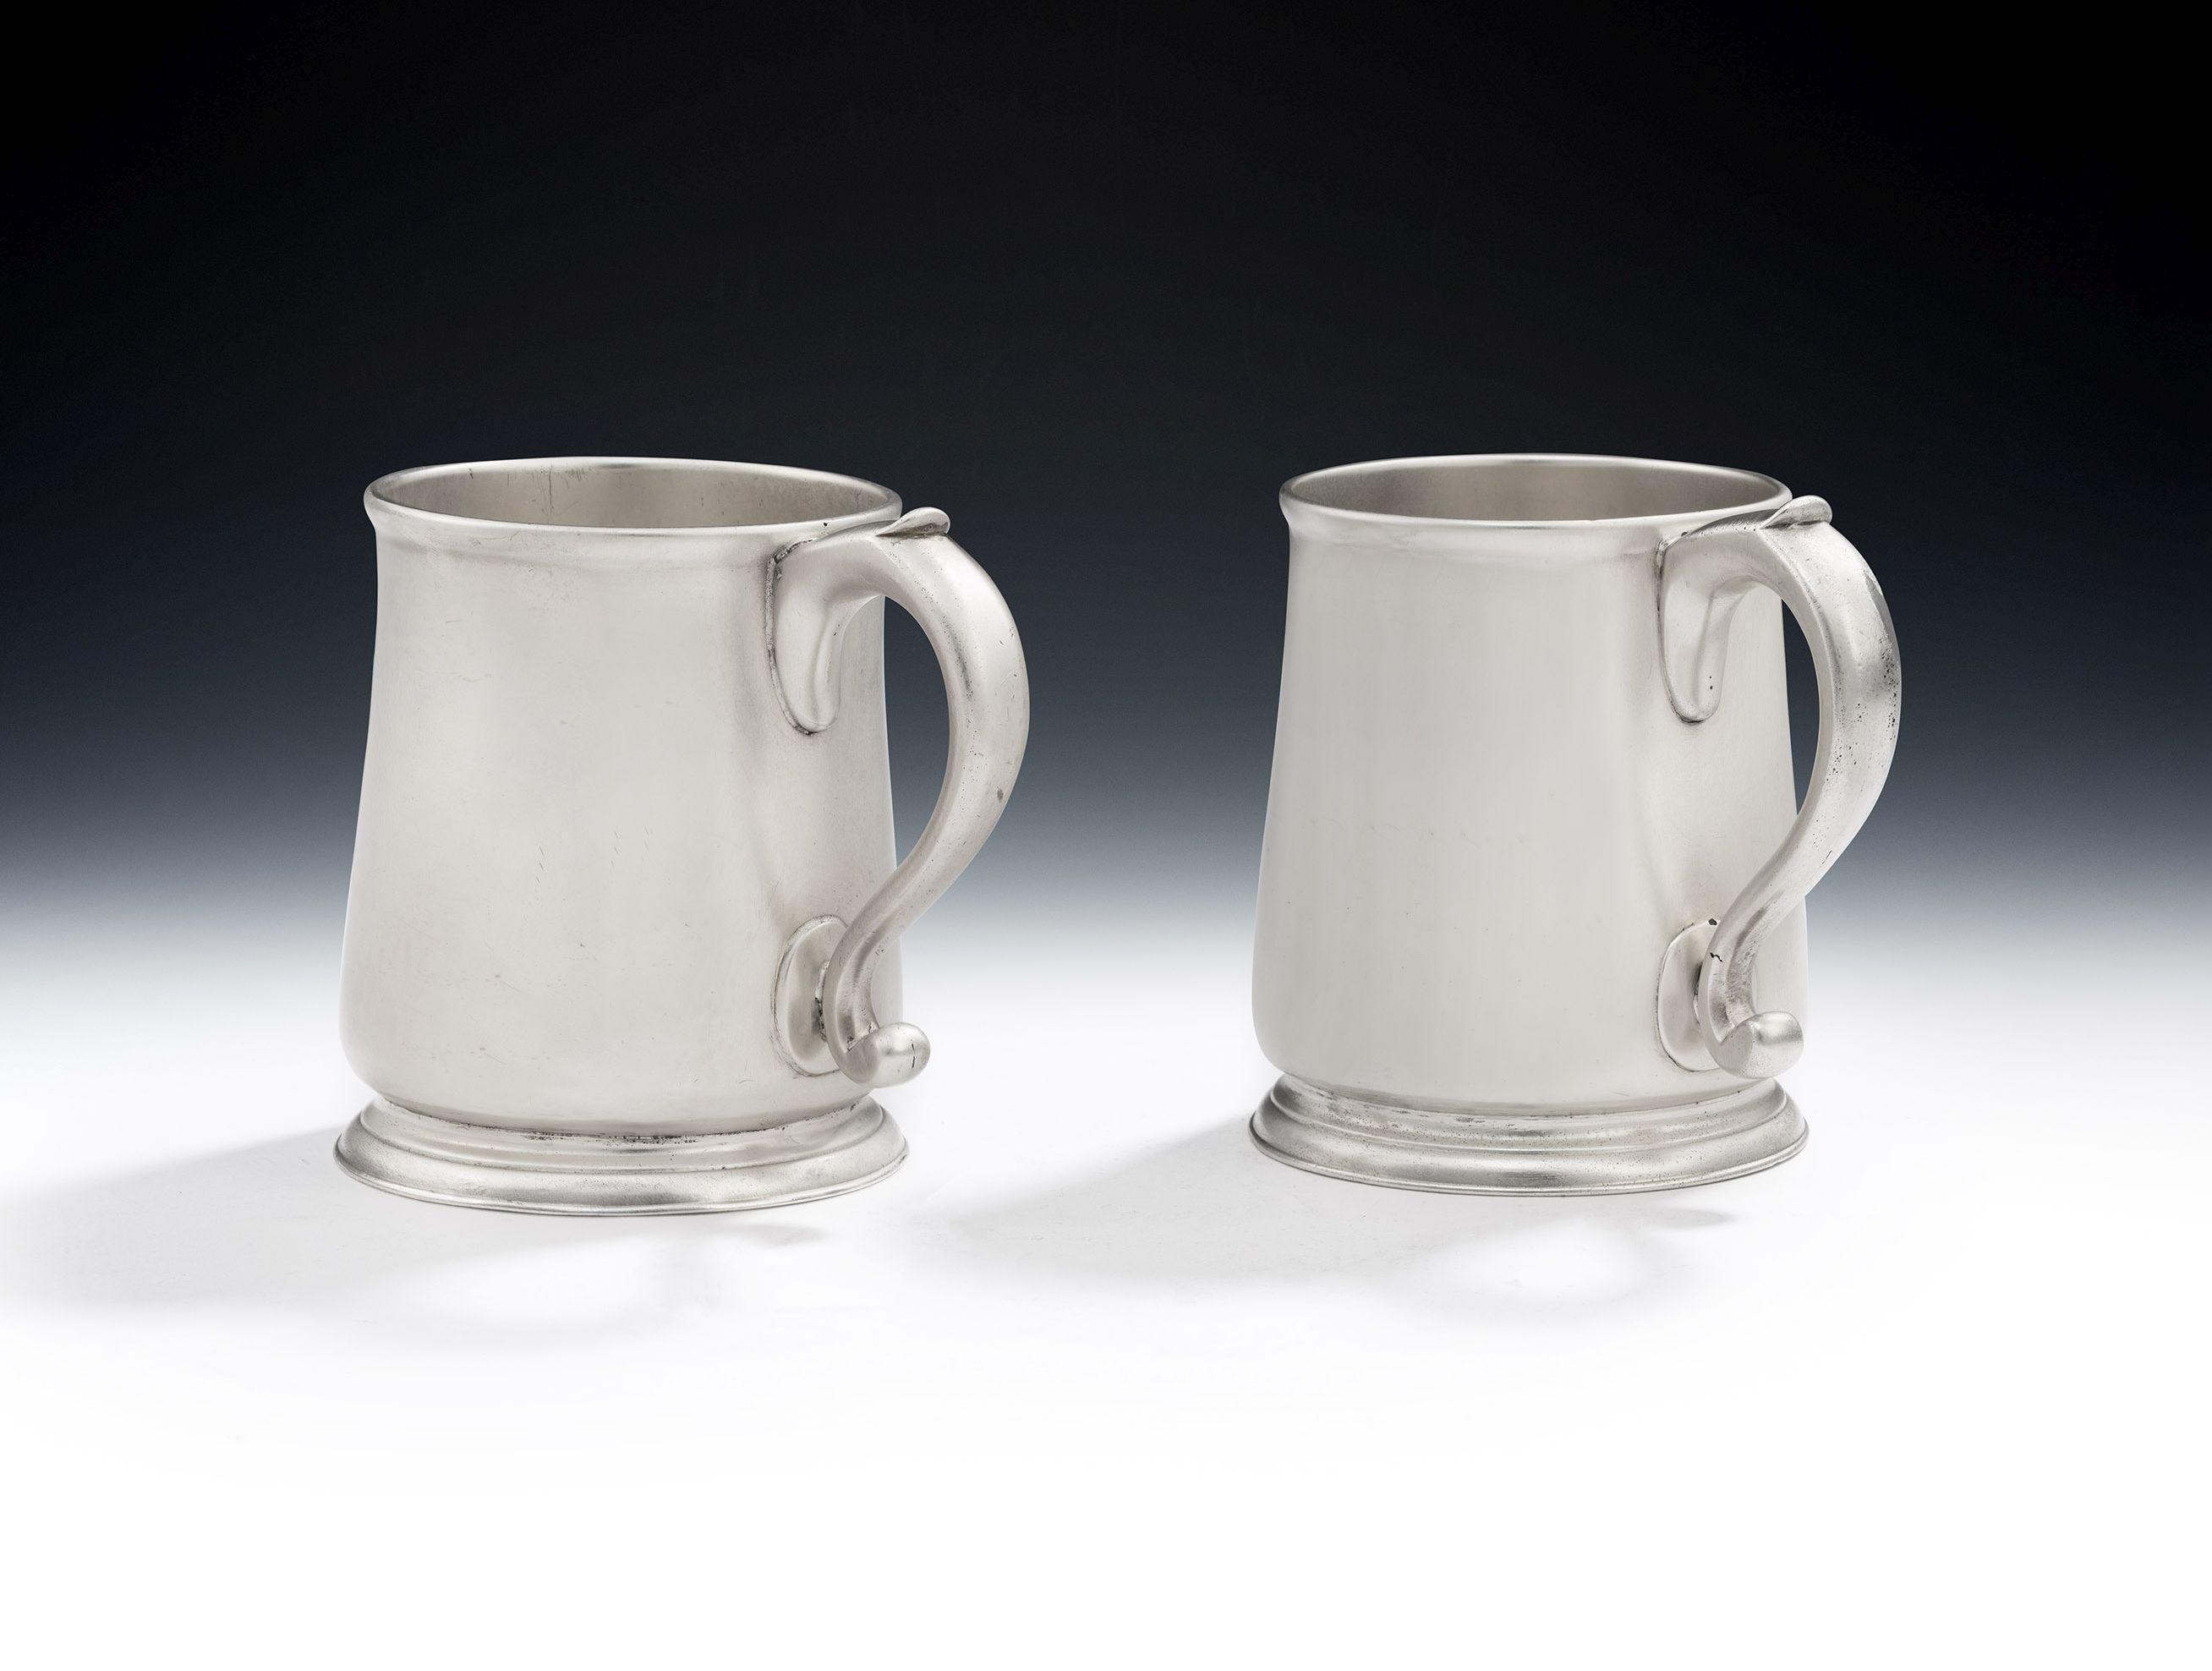 A very fine pair of early George III Mugs made in London in 1764 by Thomas Whipham II & Charles Wright.

The Mugs stand on an applied circular foot decorated with reeding. The slightly tapering sides have an everted rim and 